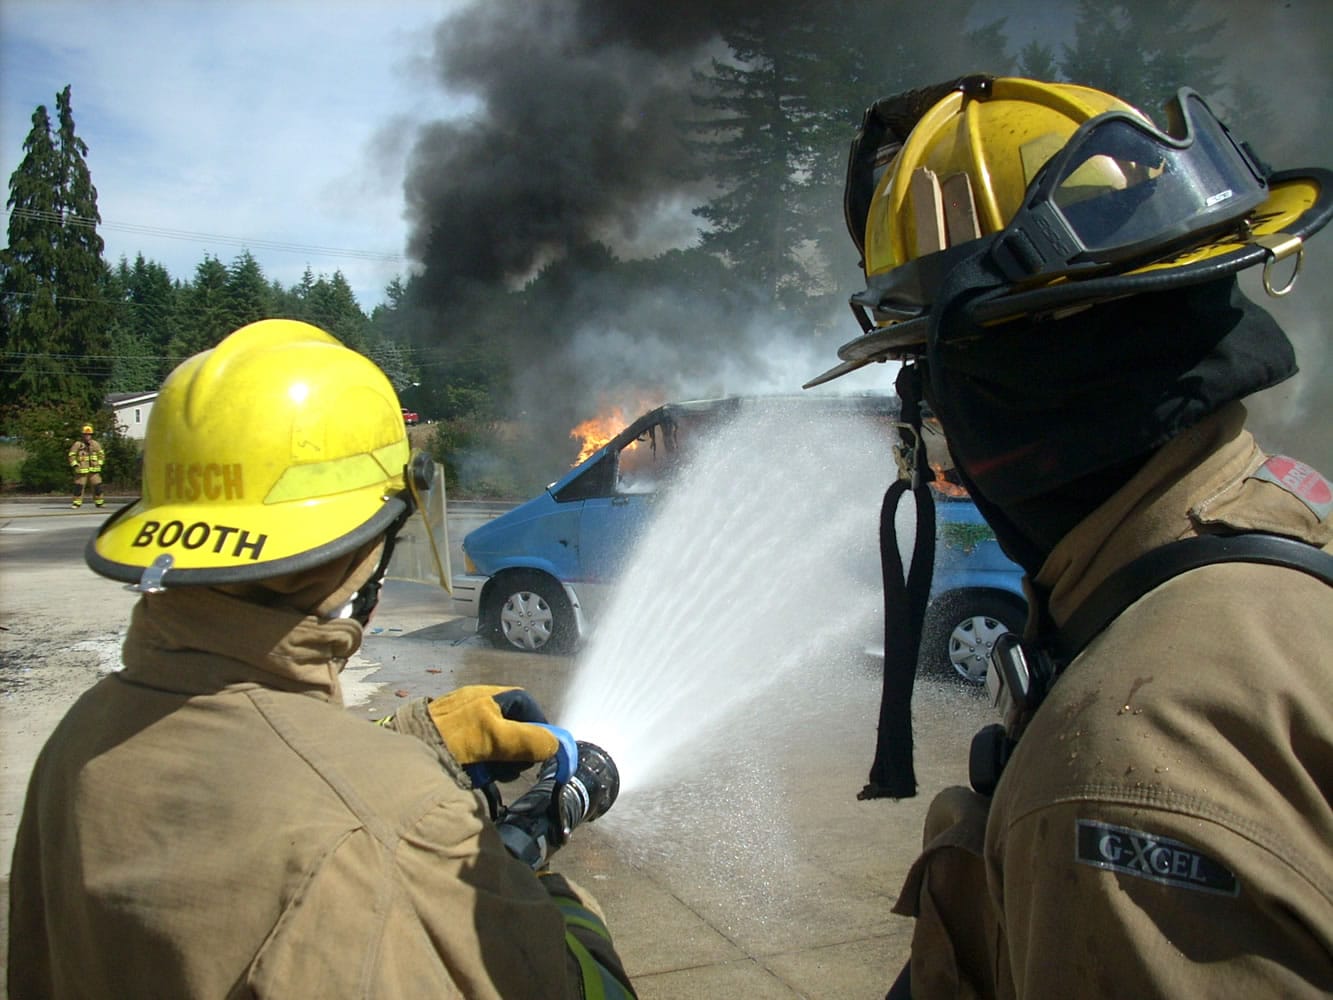 East County: A volunteer practices extinguishing a vehicle fire during East County Fire &amp; Rescue's annual Citizens' Basic Fire and EMS Academy on June 22 at the Fern Prairie Fire Station, north of Camas.